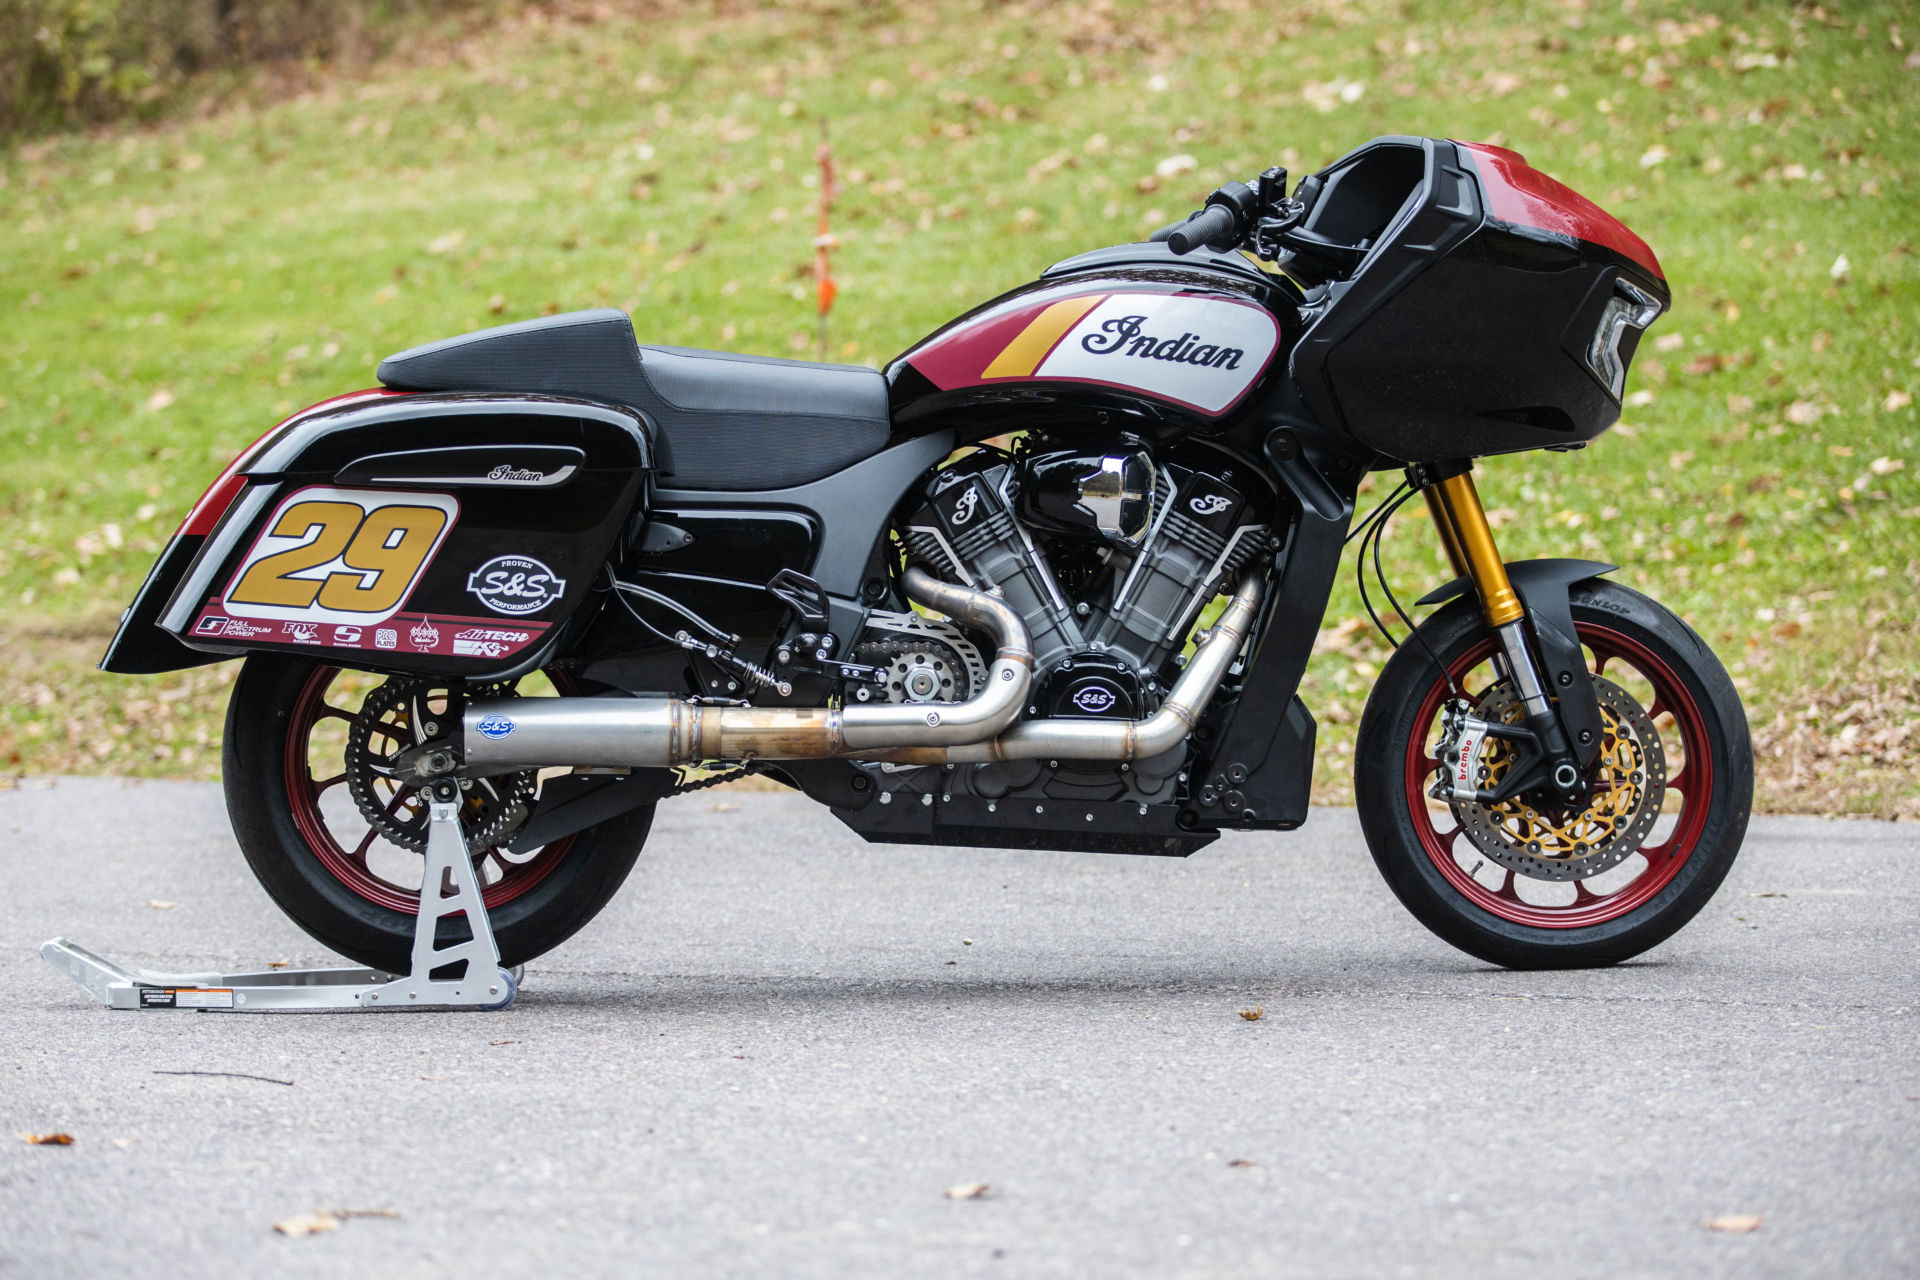 Tyler O’Hara’s Indian Challenger King of the Baggers racebike. Photo courtesy Indian Motorcycle.